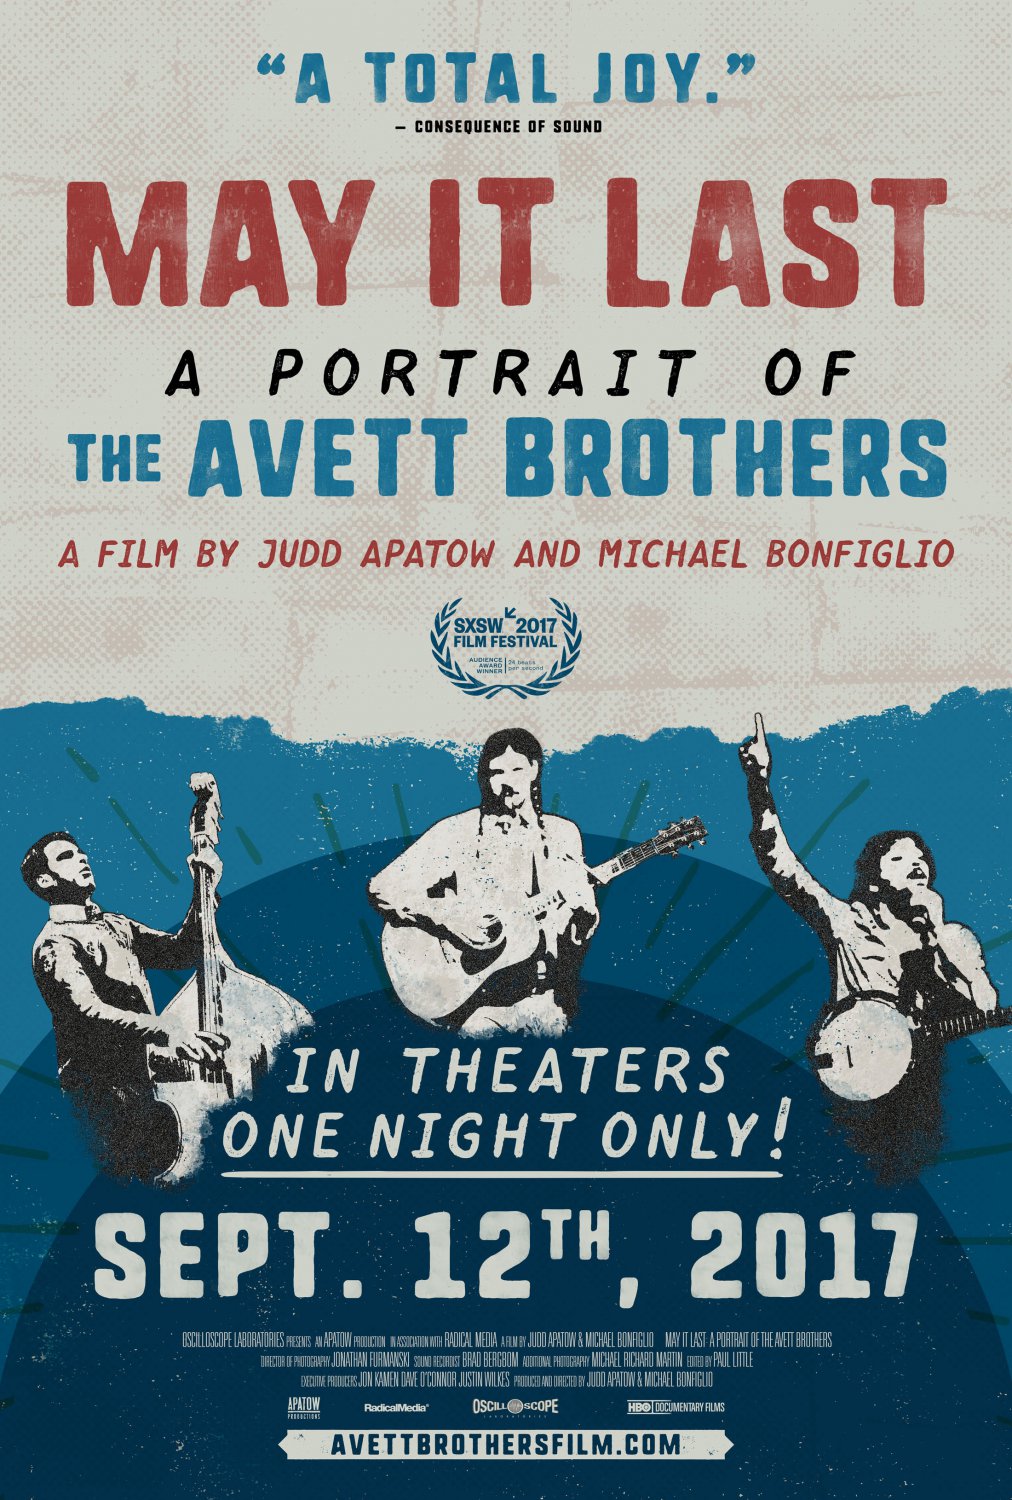 The Avett Brothers May it Last 18"x28" (45cm/70cm) Poster